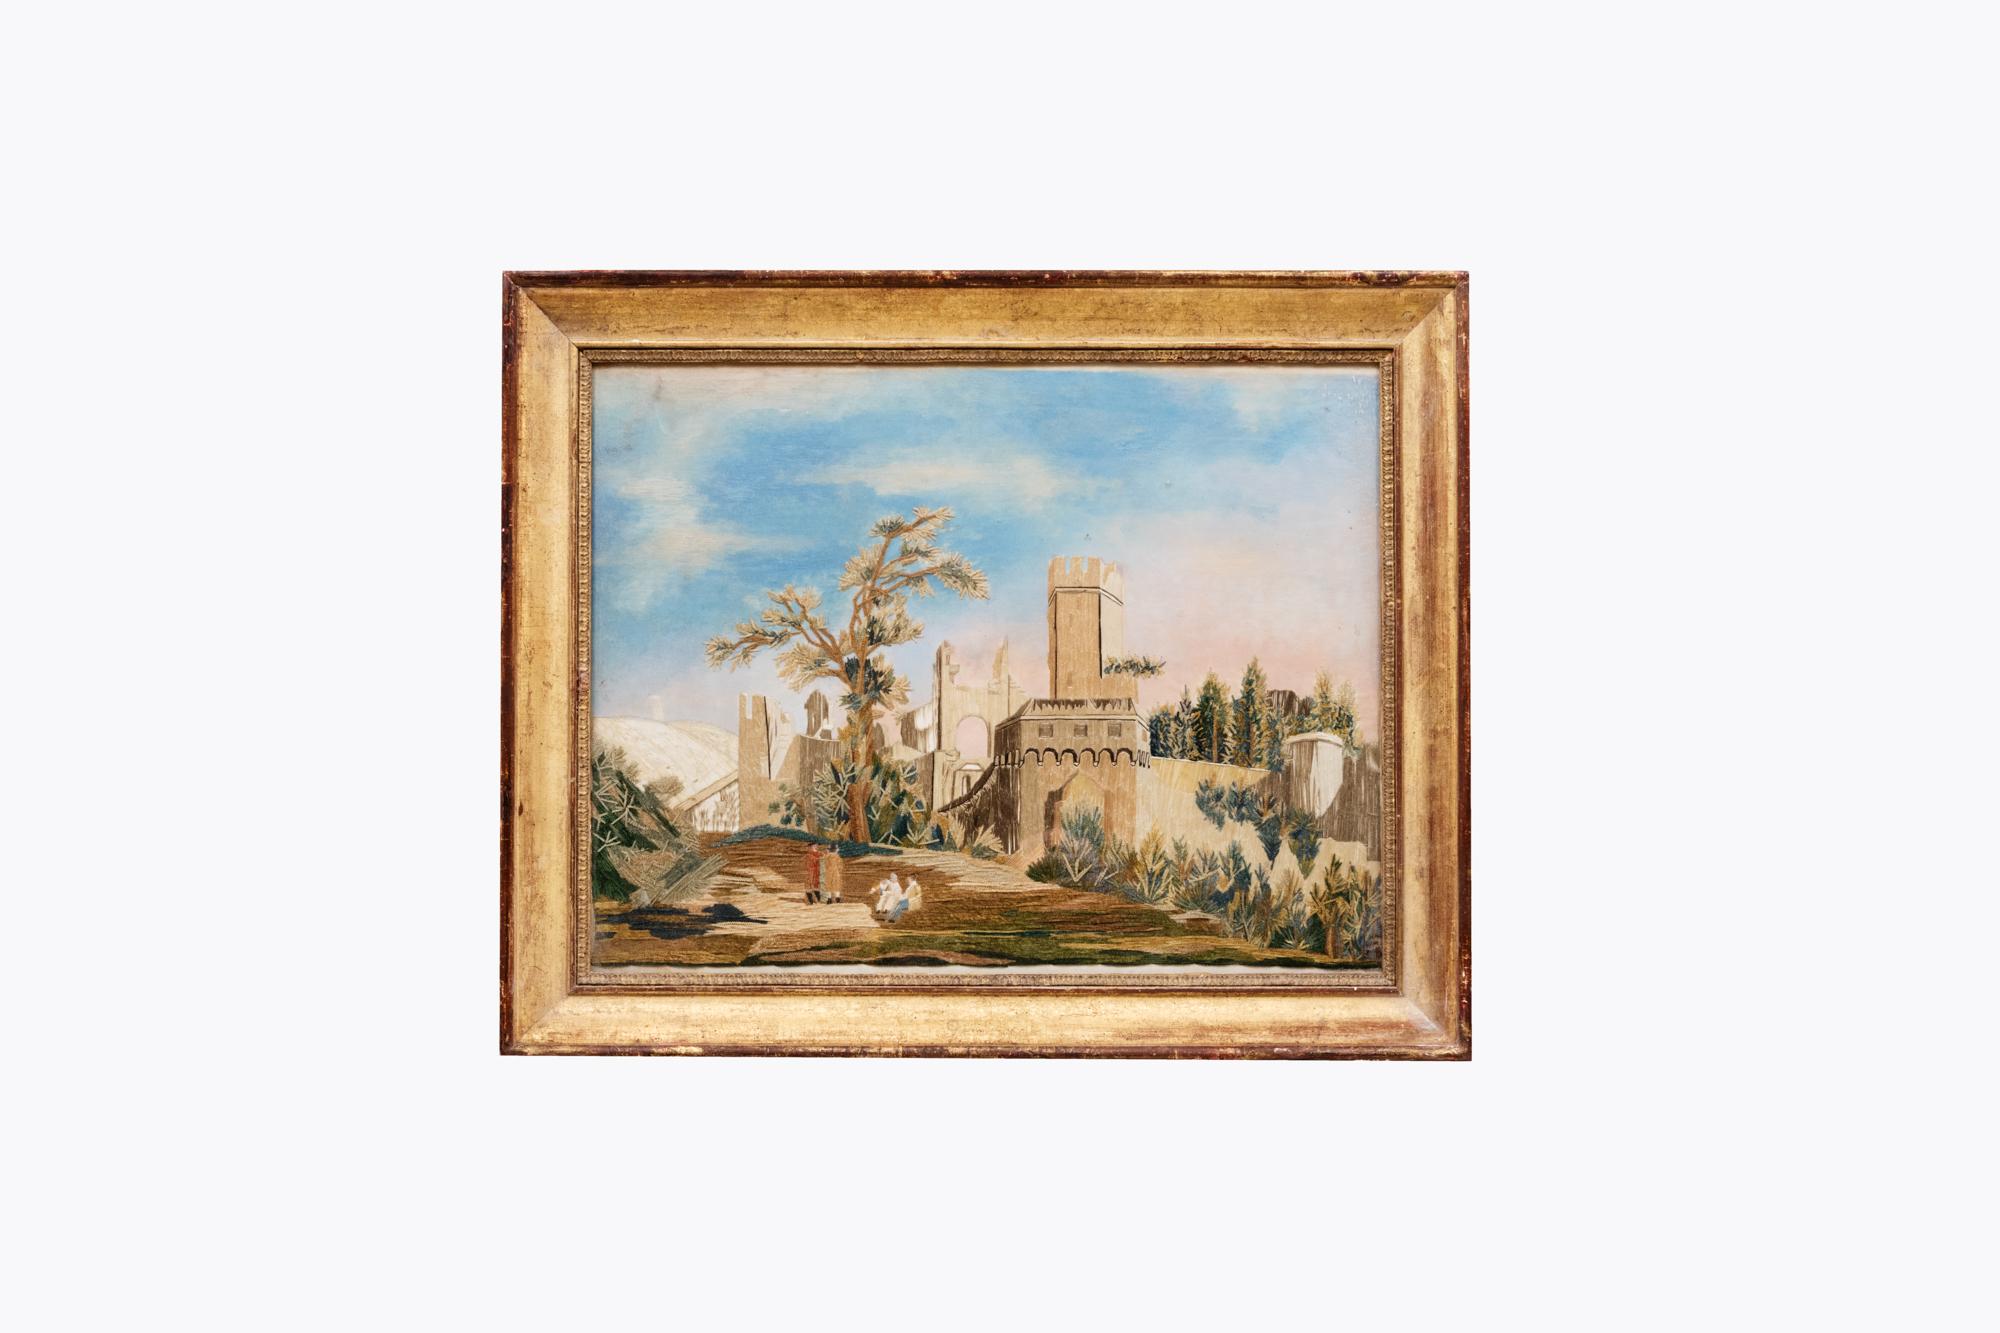 19th Century French gauche & thread capriccio of a castle scene in rural landscape with figures to the foreground. This piece is housed in a gilt frame.

The term capriccio refers to landscape or architectural compositions that combine real elements